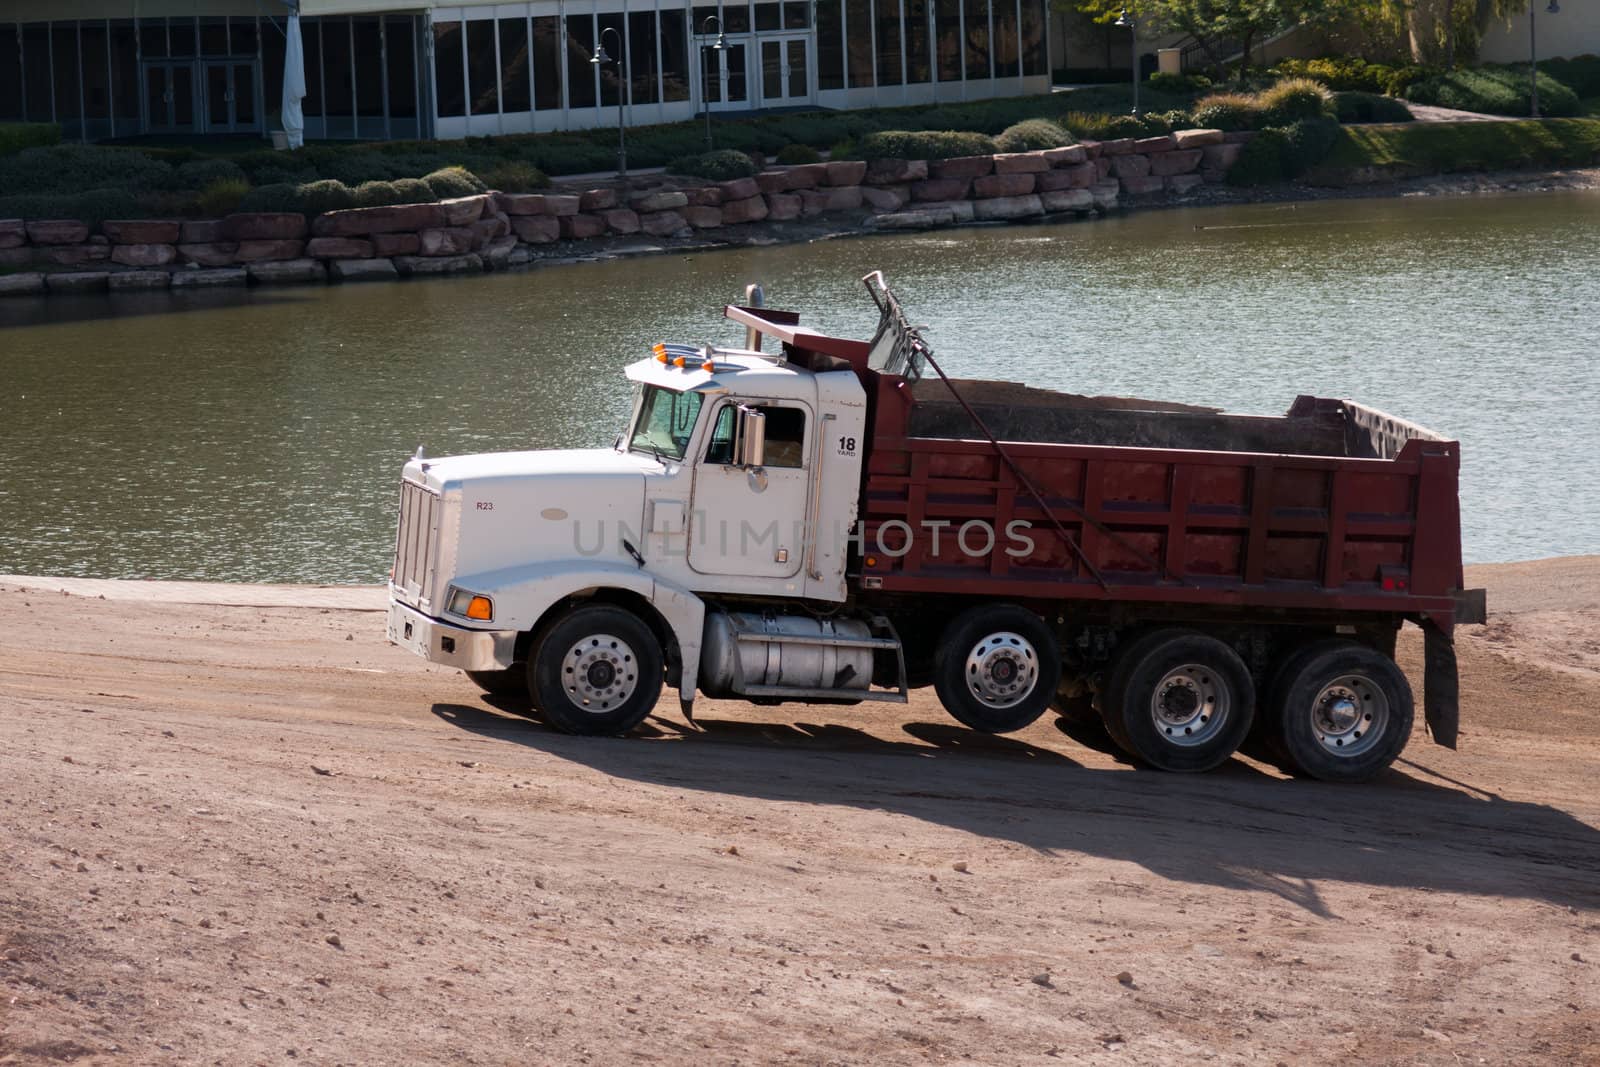 sand gravel truck hauling load from lake